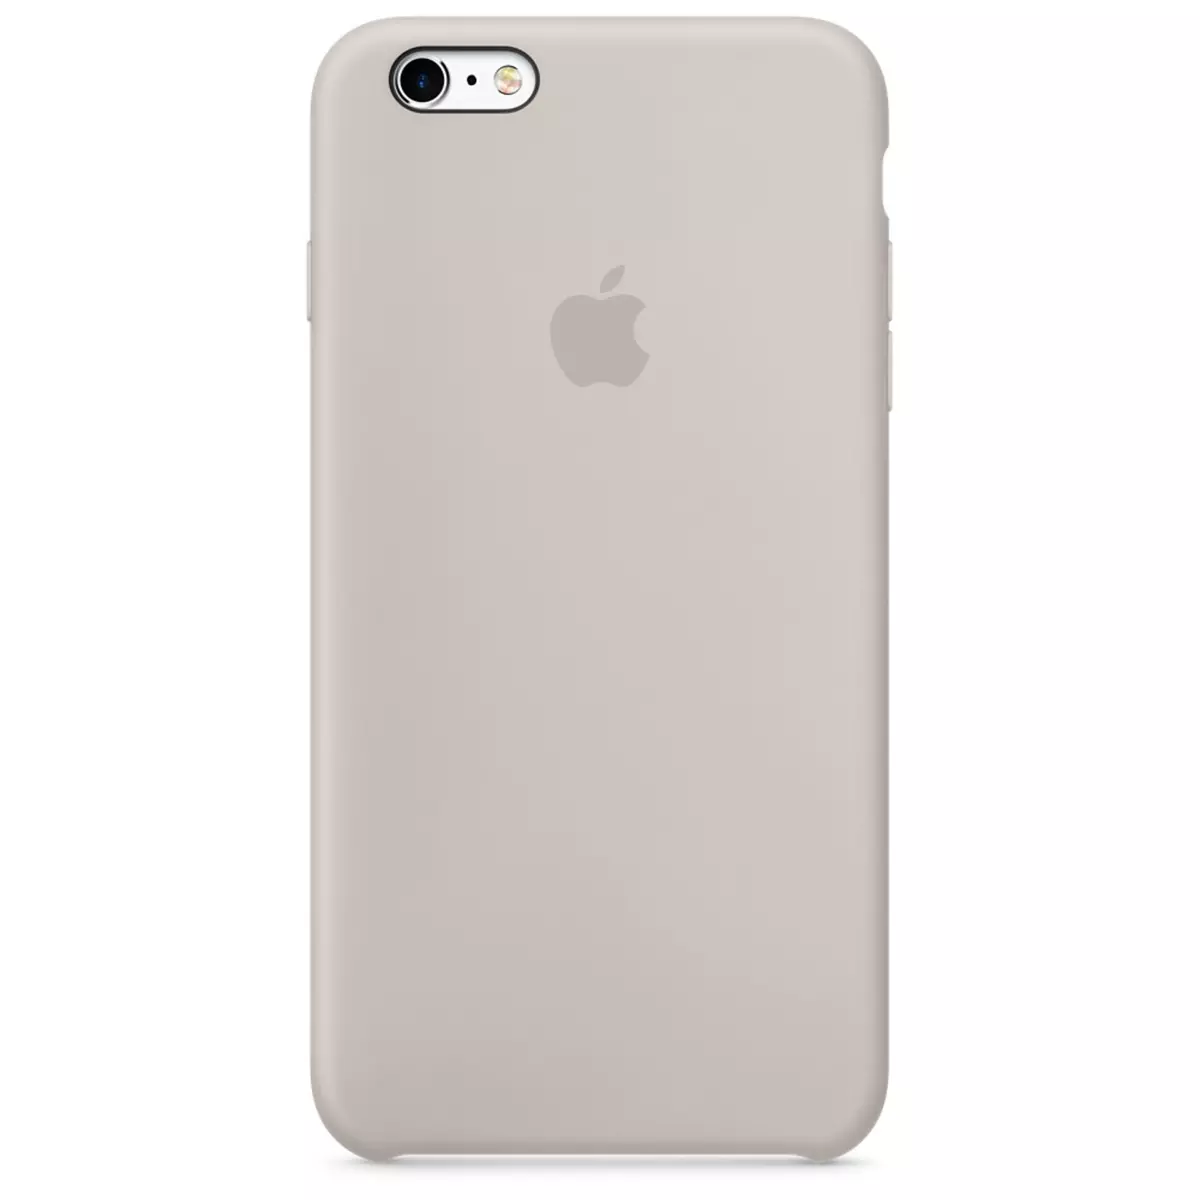 APPLE Coque silicone iPhone 6+/6S+ - Gris sable